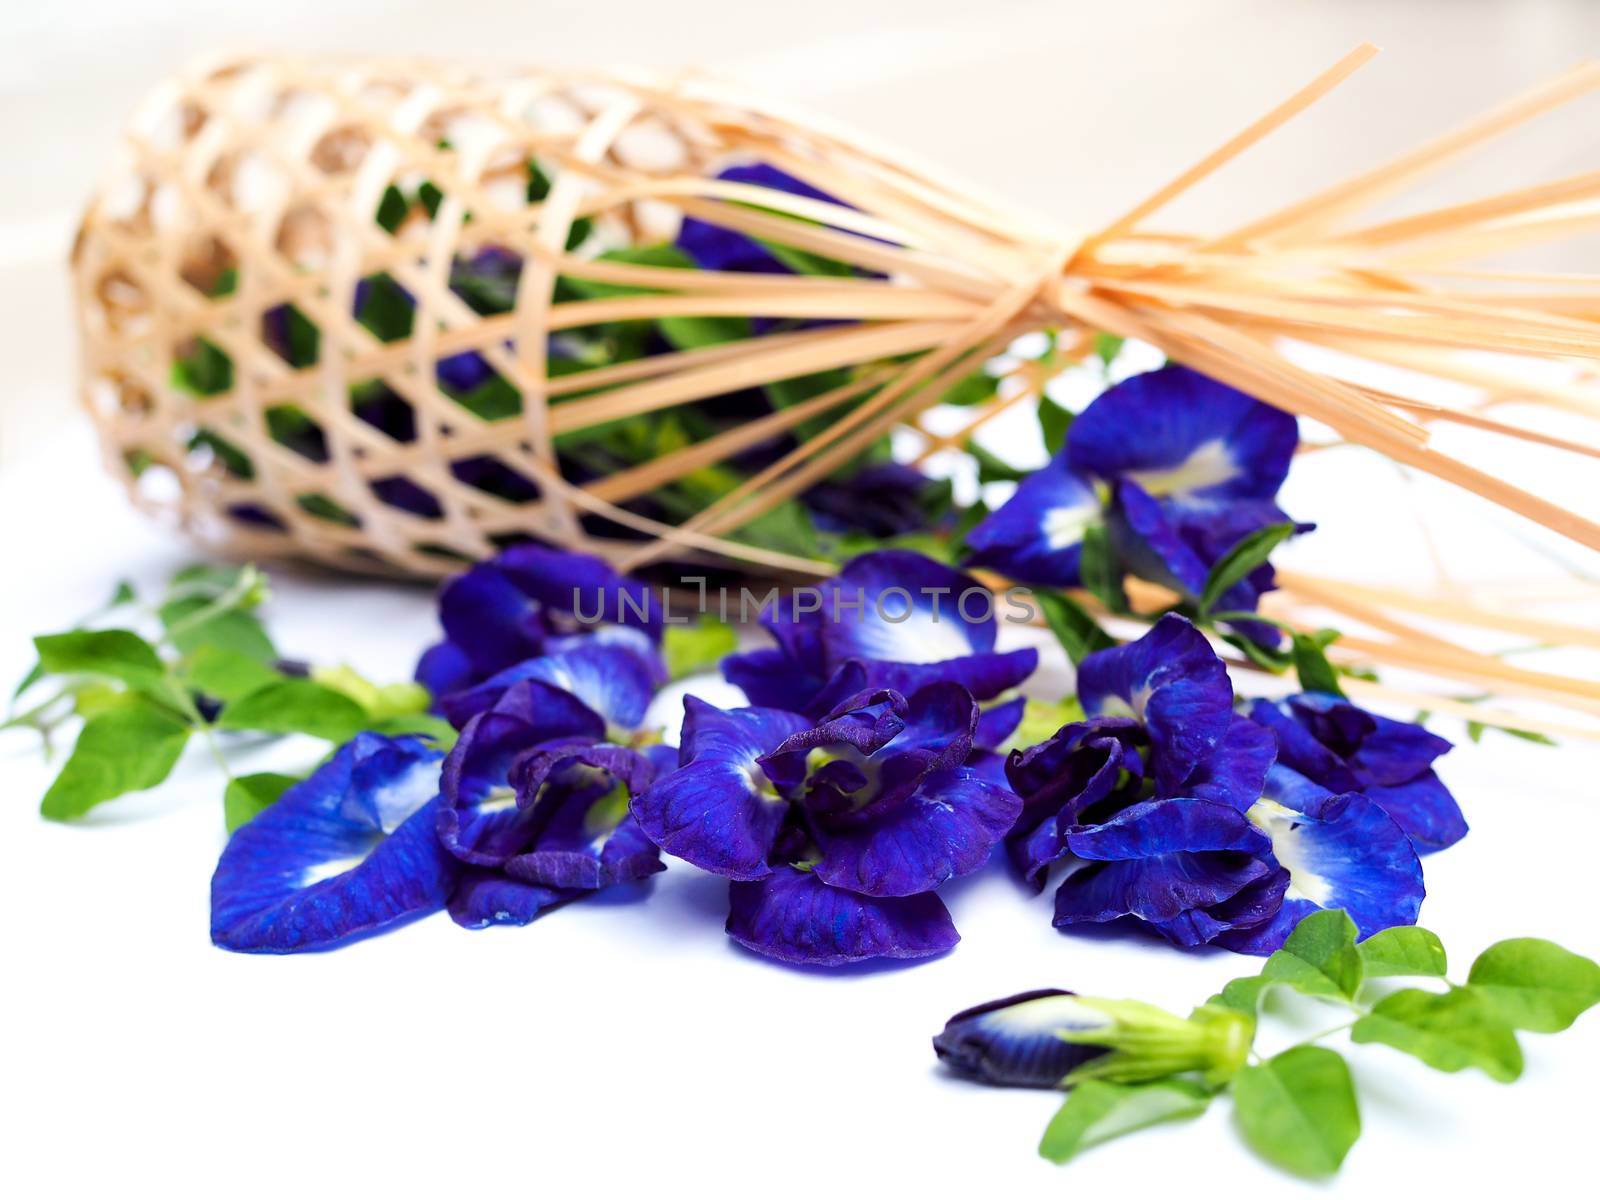 plant in nature is herb with butterfly pea isolated on white background.